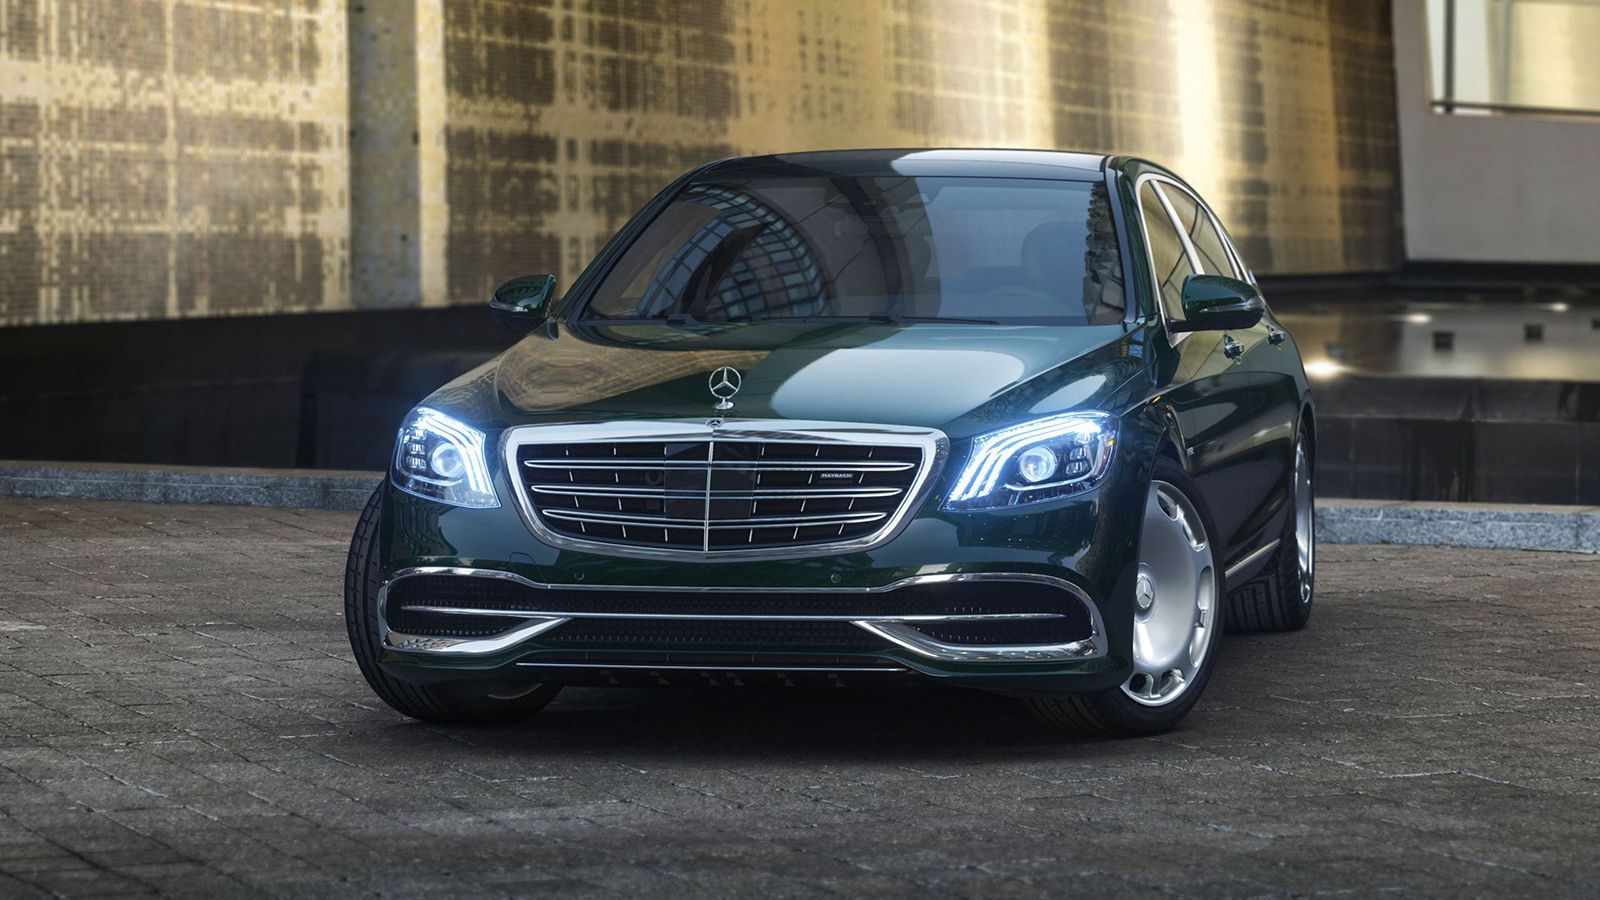 The V12 Lives On In The Next Mercedes S Class—but Not The GLS SUV